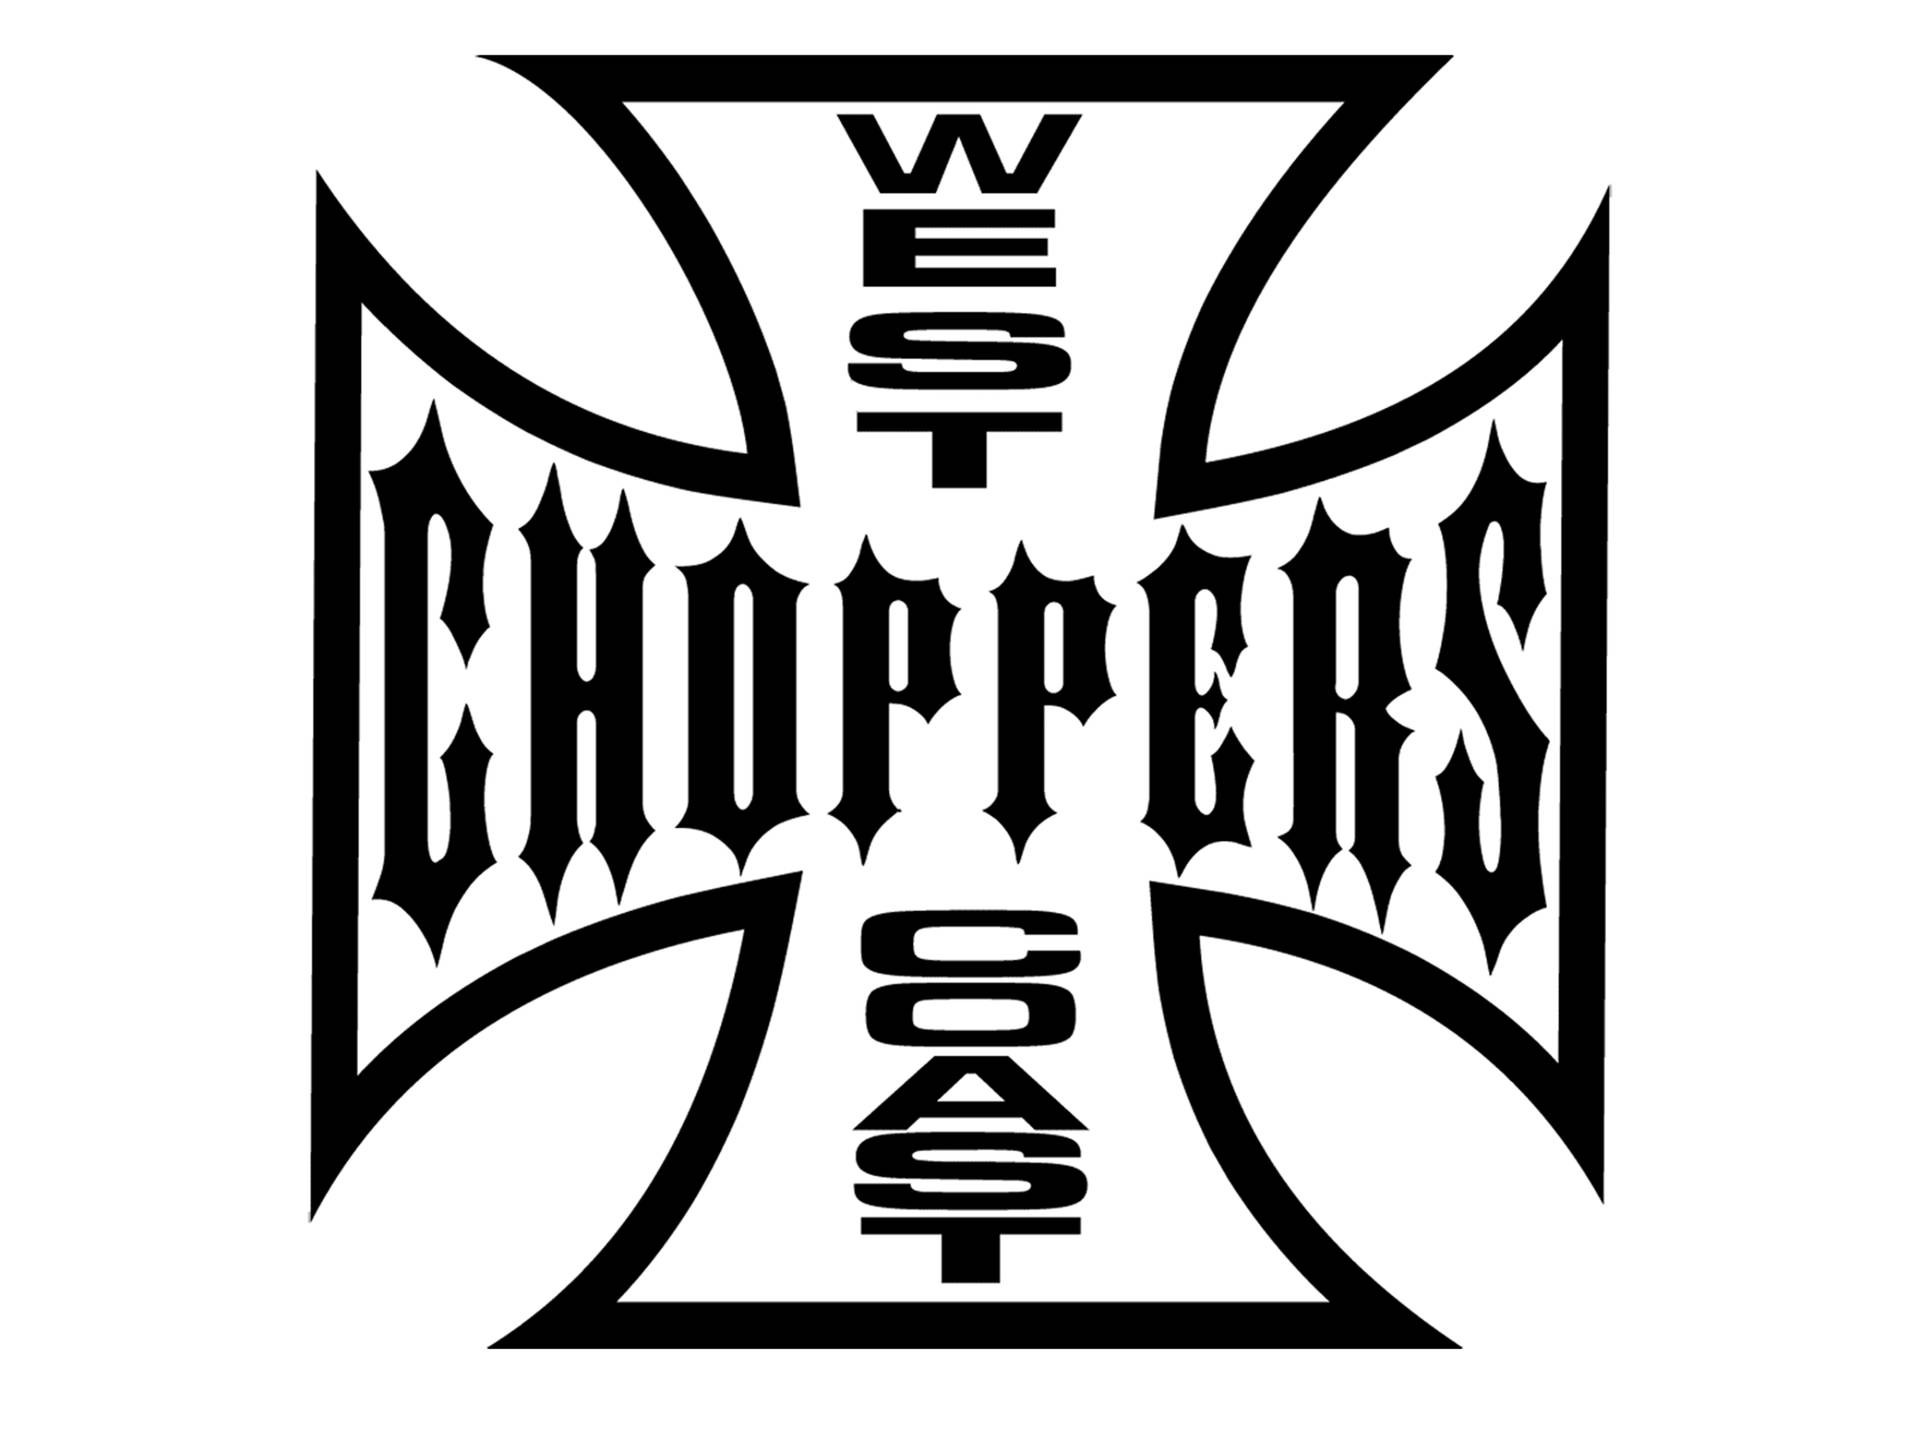 Top 999+ West Coast Choppers Wallpapers Full HD, 4K Free to Use